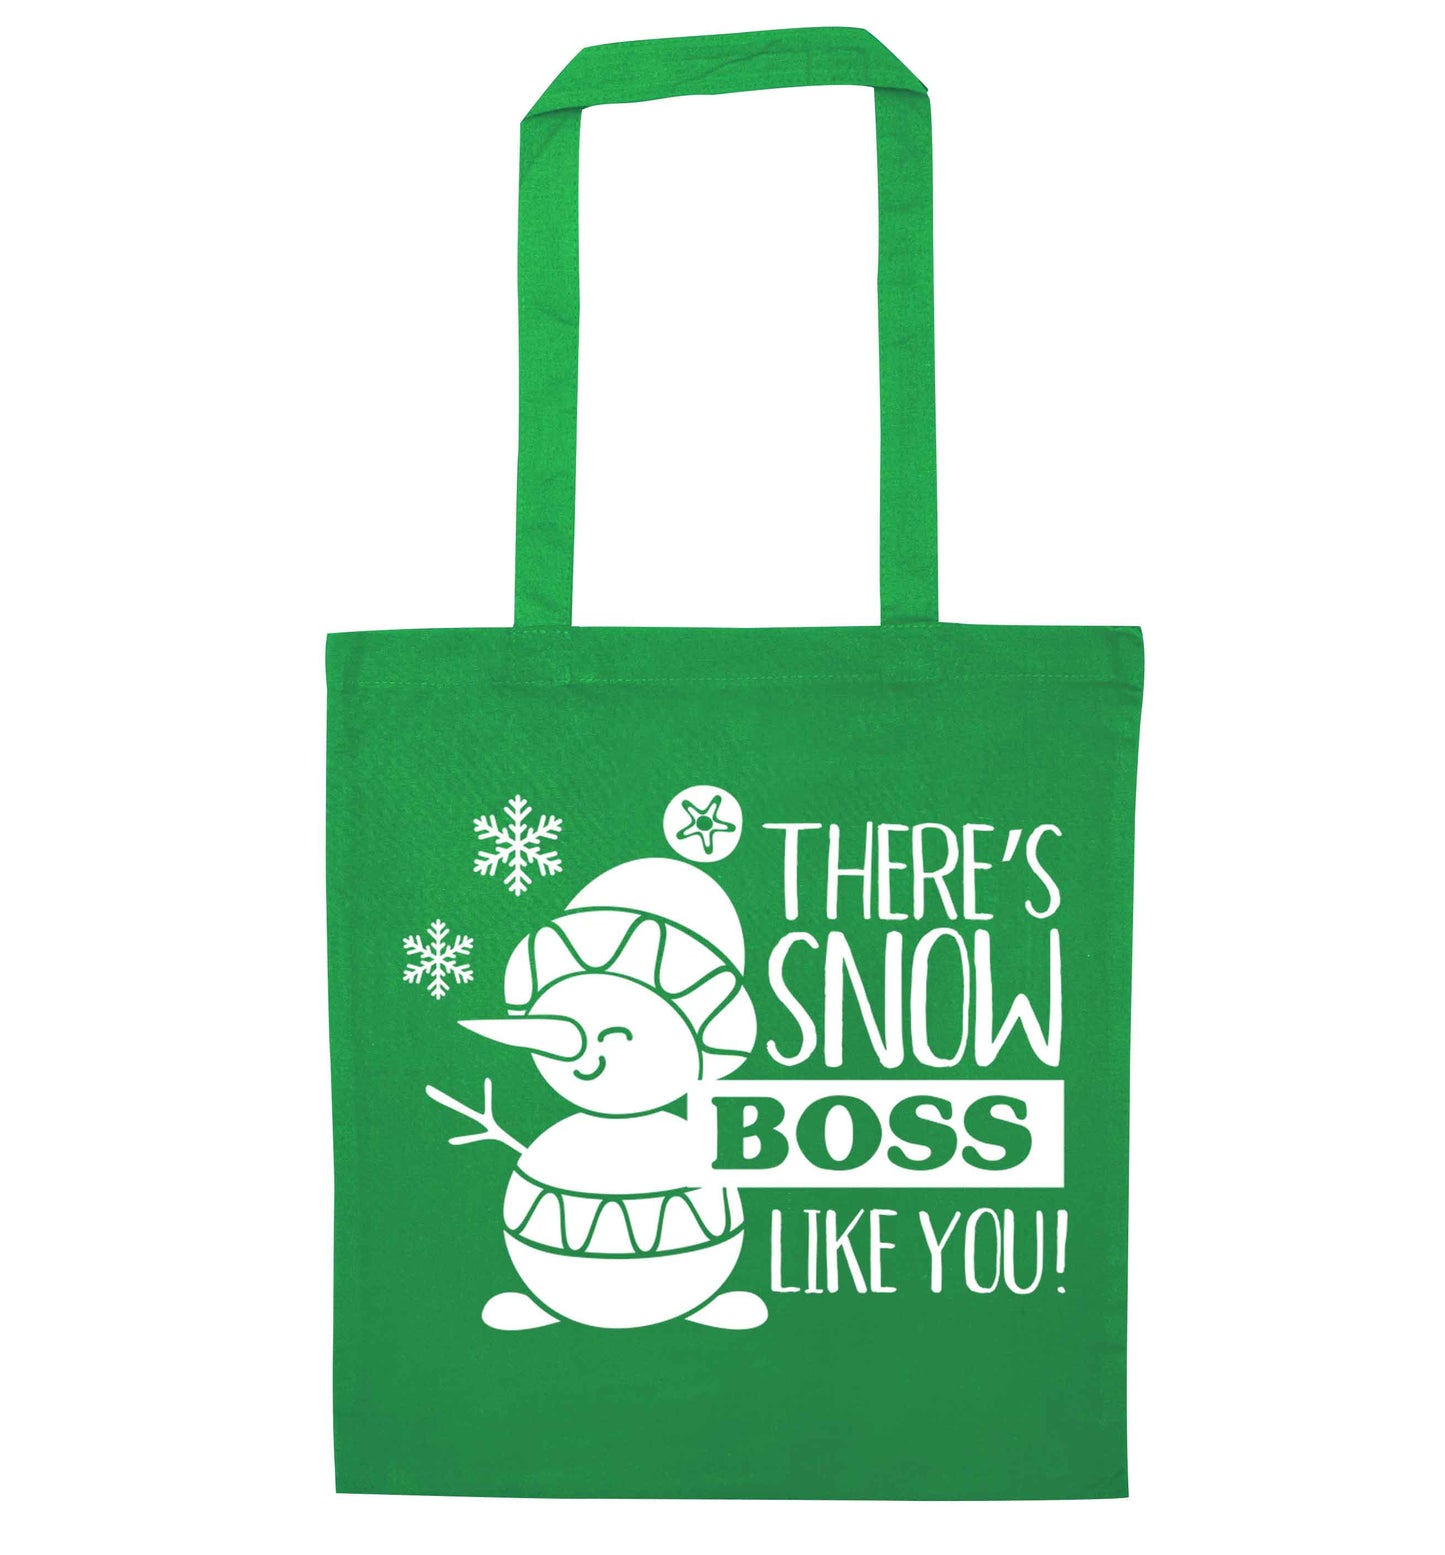 There's snow boss like you green tote bag